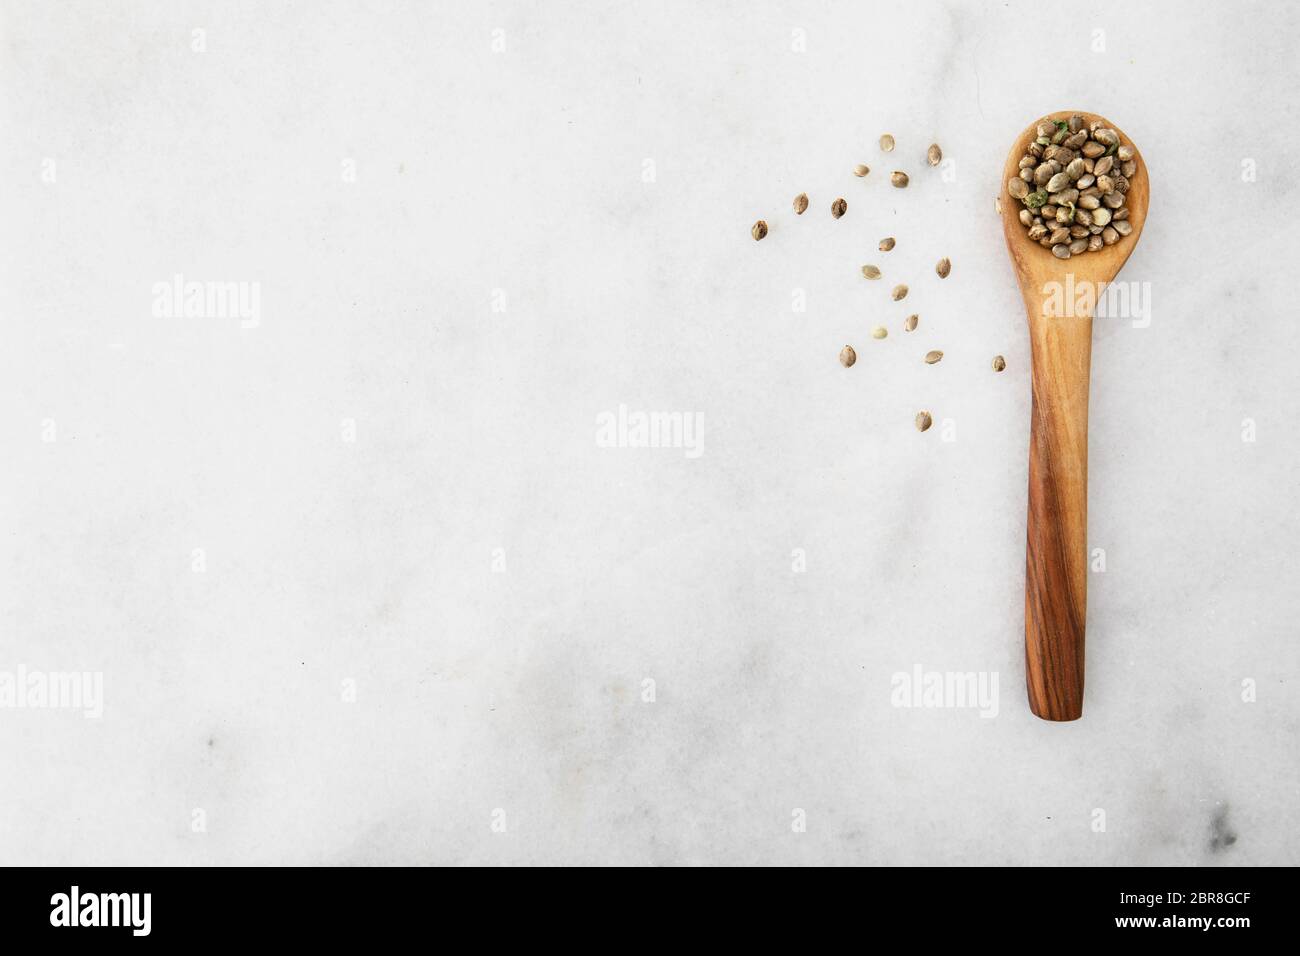 Cannabis seeds in a wooden spooon on a light marble surface with copy space, viewed from directly above. Stock Photo